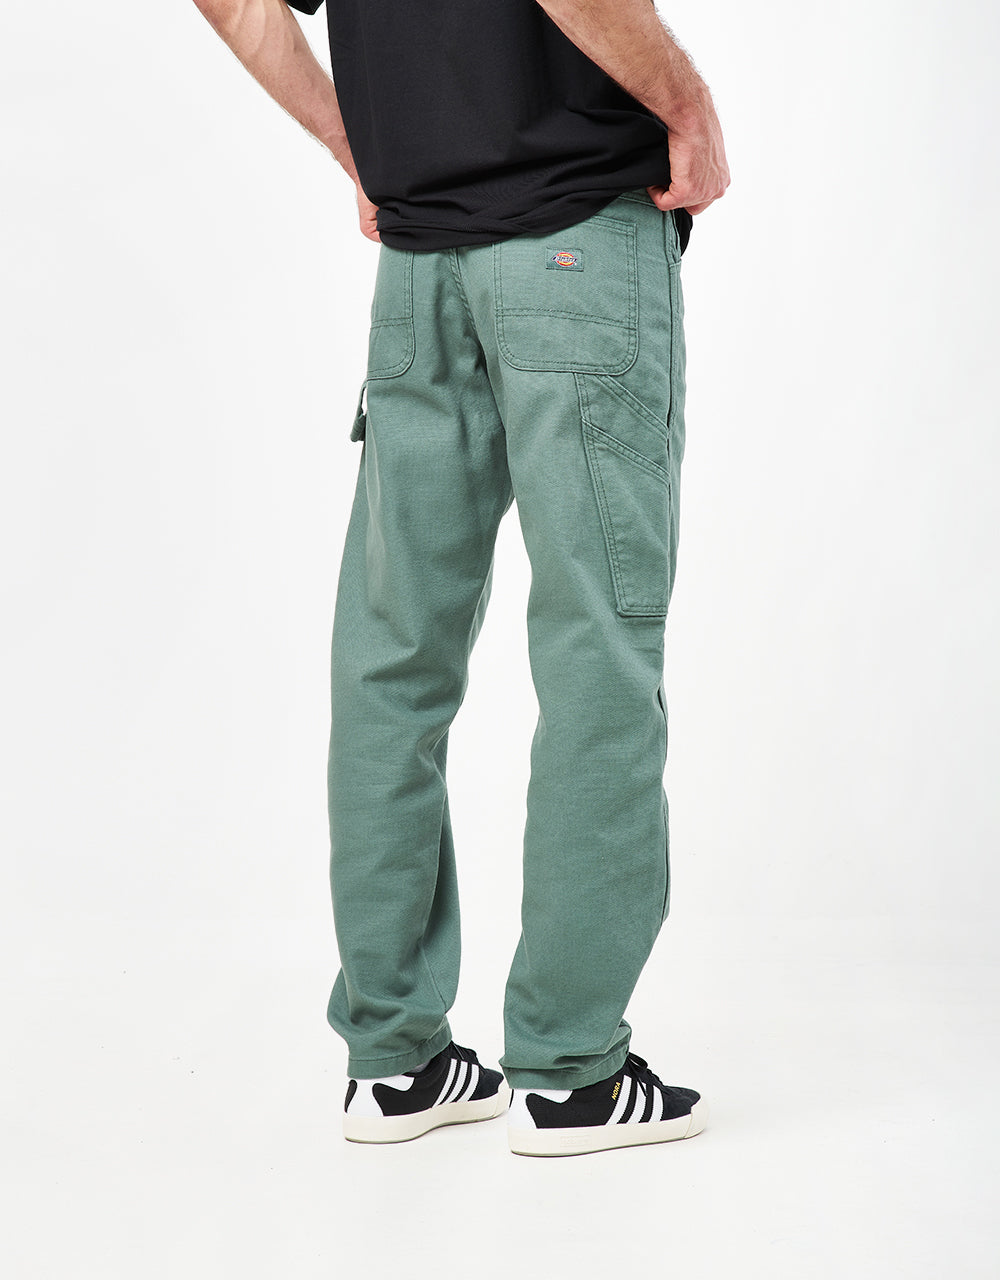 Dickies Duck Canvas Carpenter Pant - Stone Washed Dark Forest